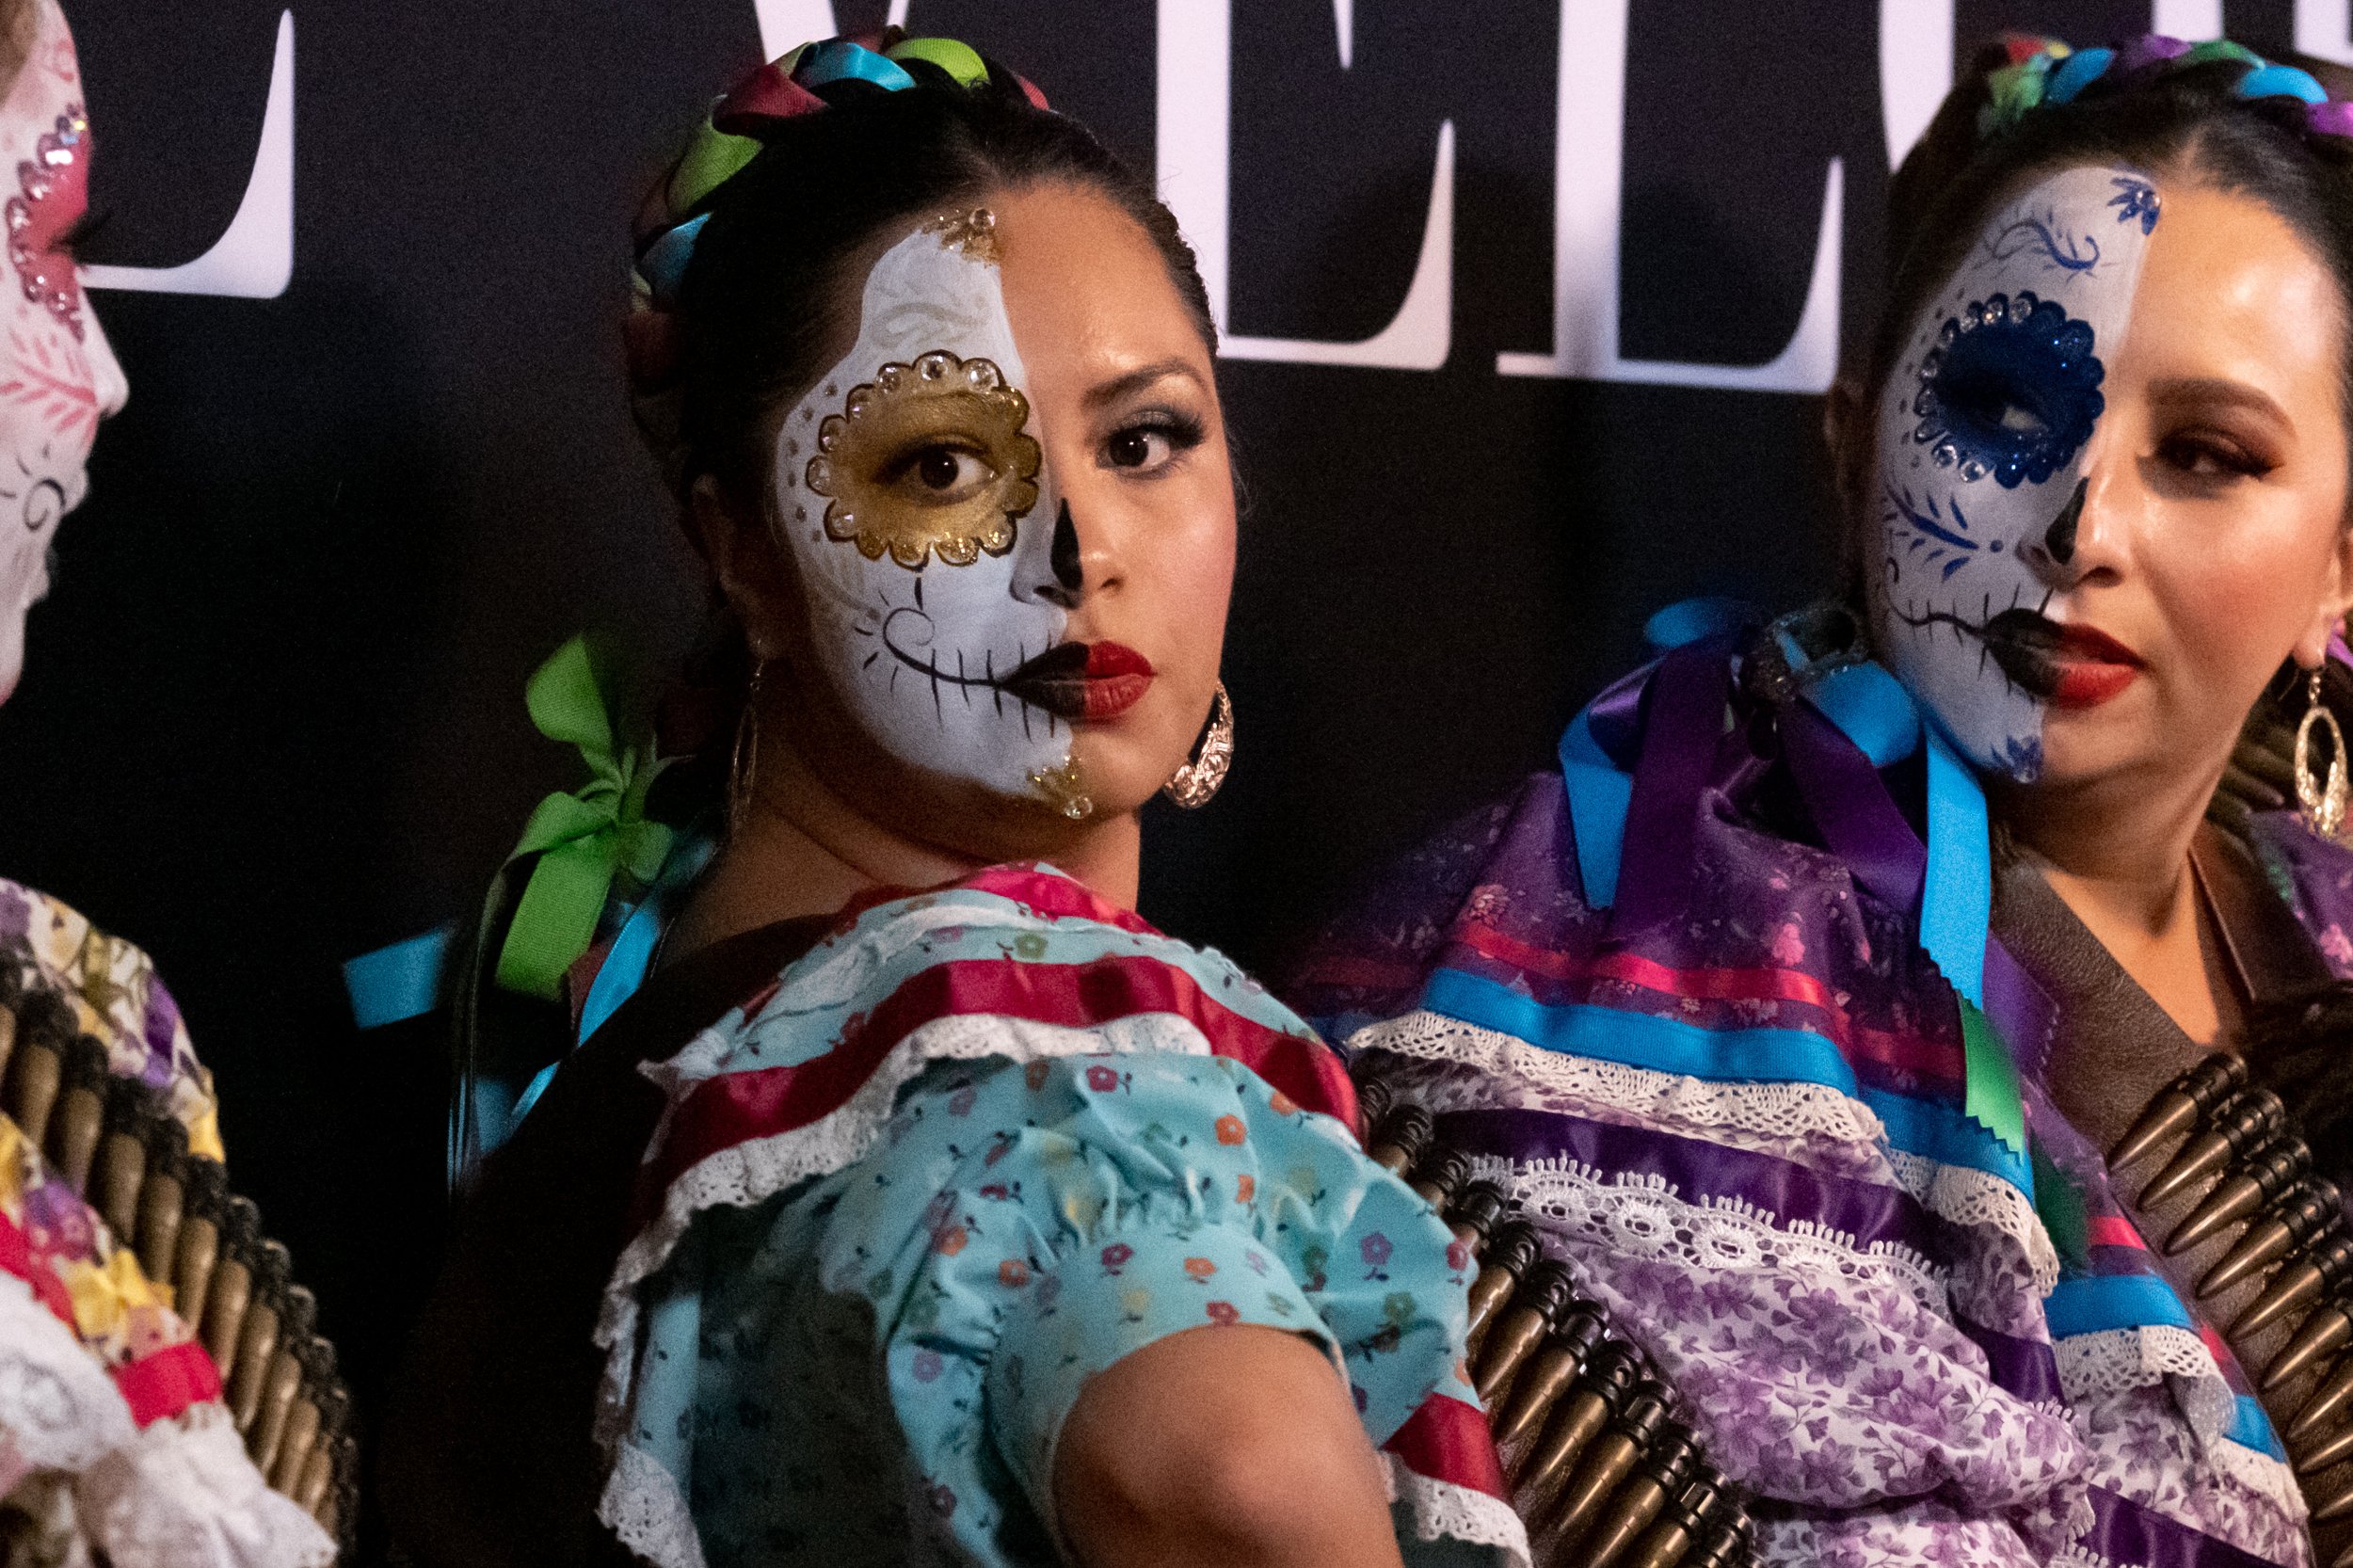  Ballet Folklorico dancers Folklor Pasion Mexicana de Los Angeles pose in front of the step and repeat banner at the entrance to El Velorio's 13th Day of the Dead Music & Arts Festival at La Plaza de la Raza, Los Angeles, Calif. on Saturday Oct. 14, 